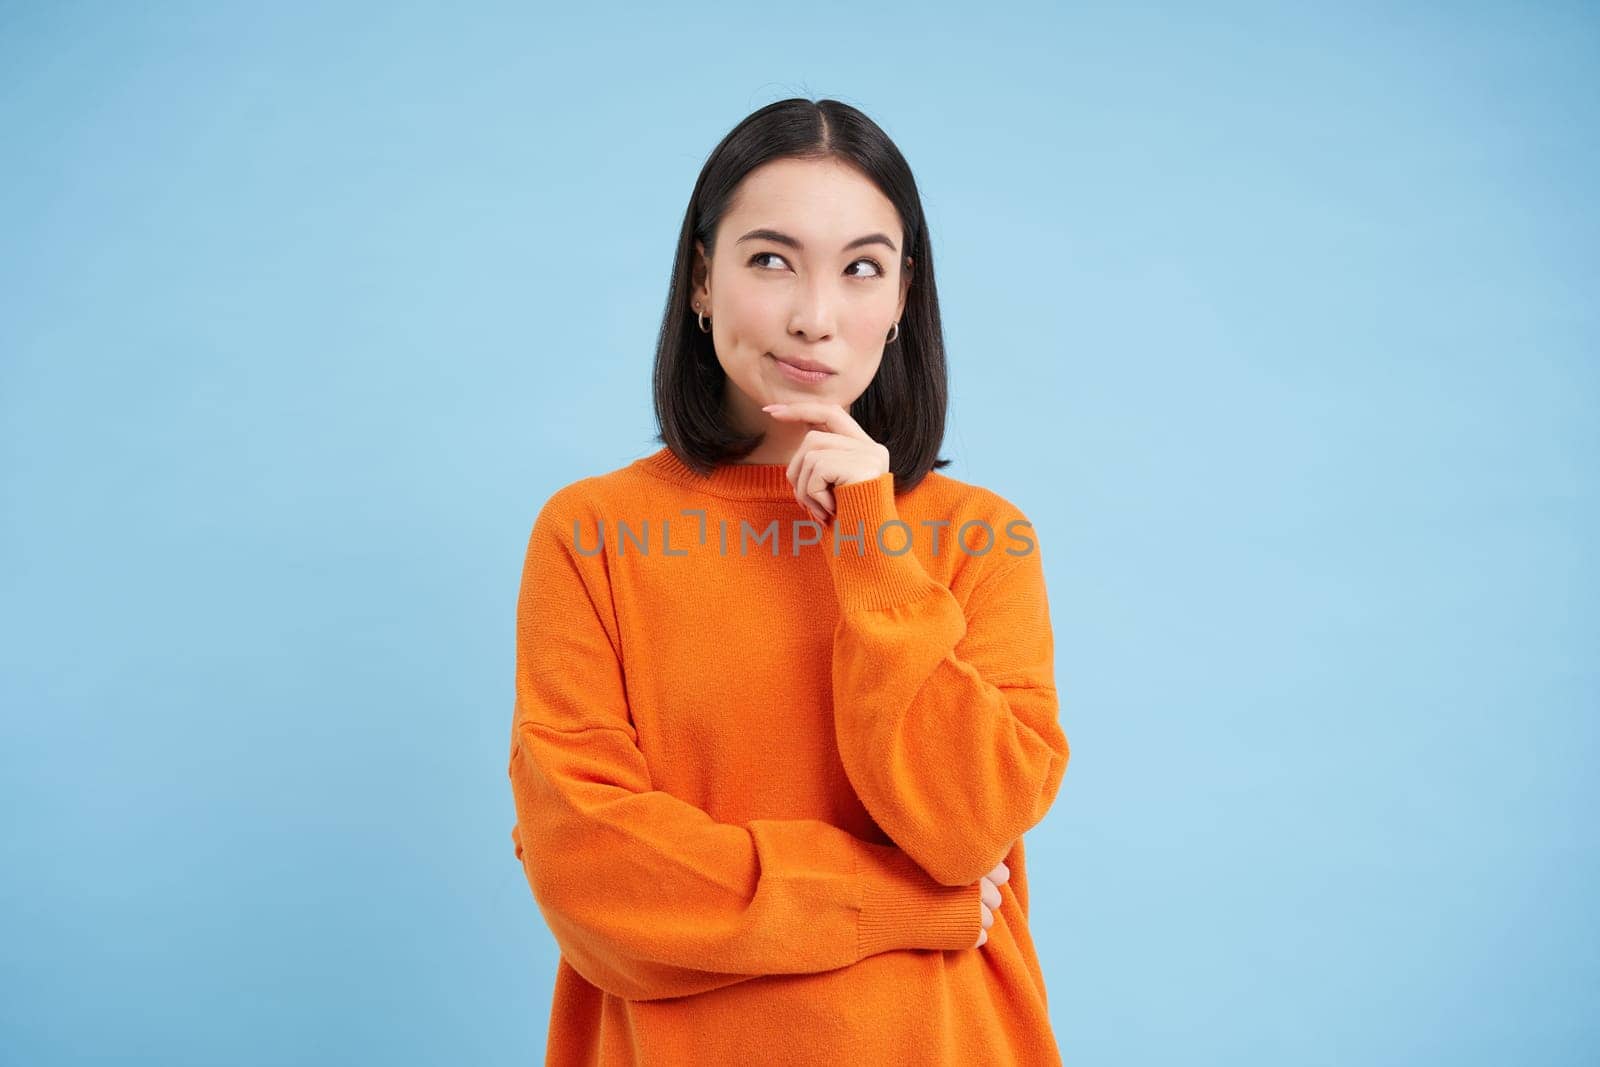 Brainstorm, ideas concept. Portrait of asian girl thinks and looks puzzled, stands thoughtful in orange sweatshirt, makes decision, blue background.